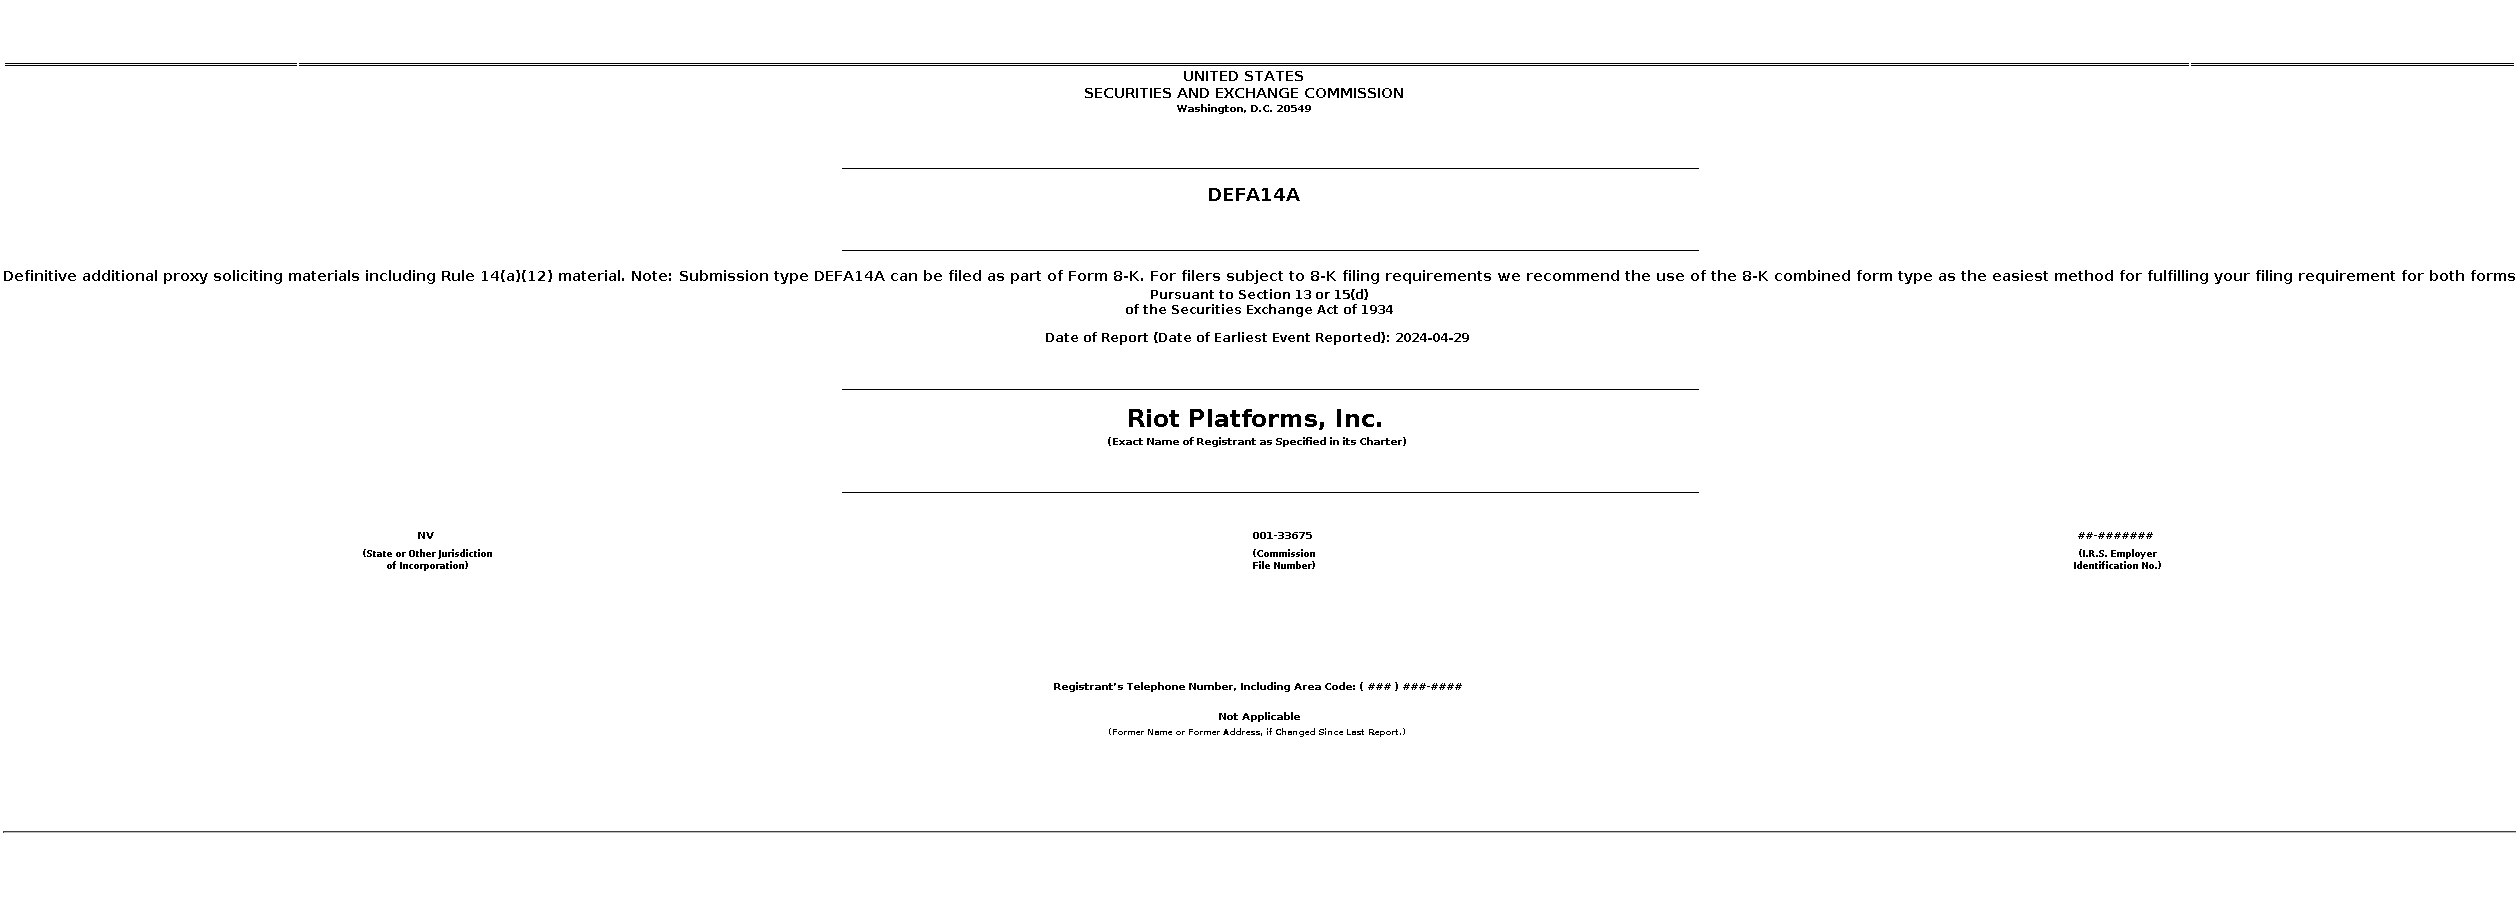 RIOT : DEFA14A Definitive additional proxy soliciting materials including Rule 14(a)(12) material. Note: Submission type DEFA14A can be filed as part of Form 8-K. For filers subject to 8-K filing requirements we recommend the use of the 8-K combined form type as the easiest method for fulfilling your filing requirement for both forms